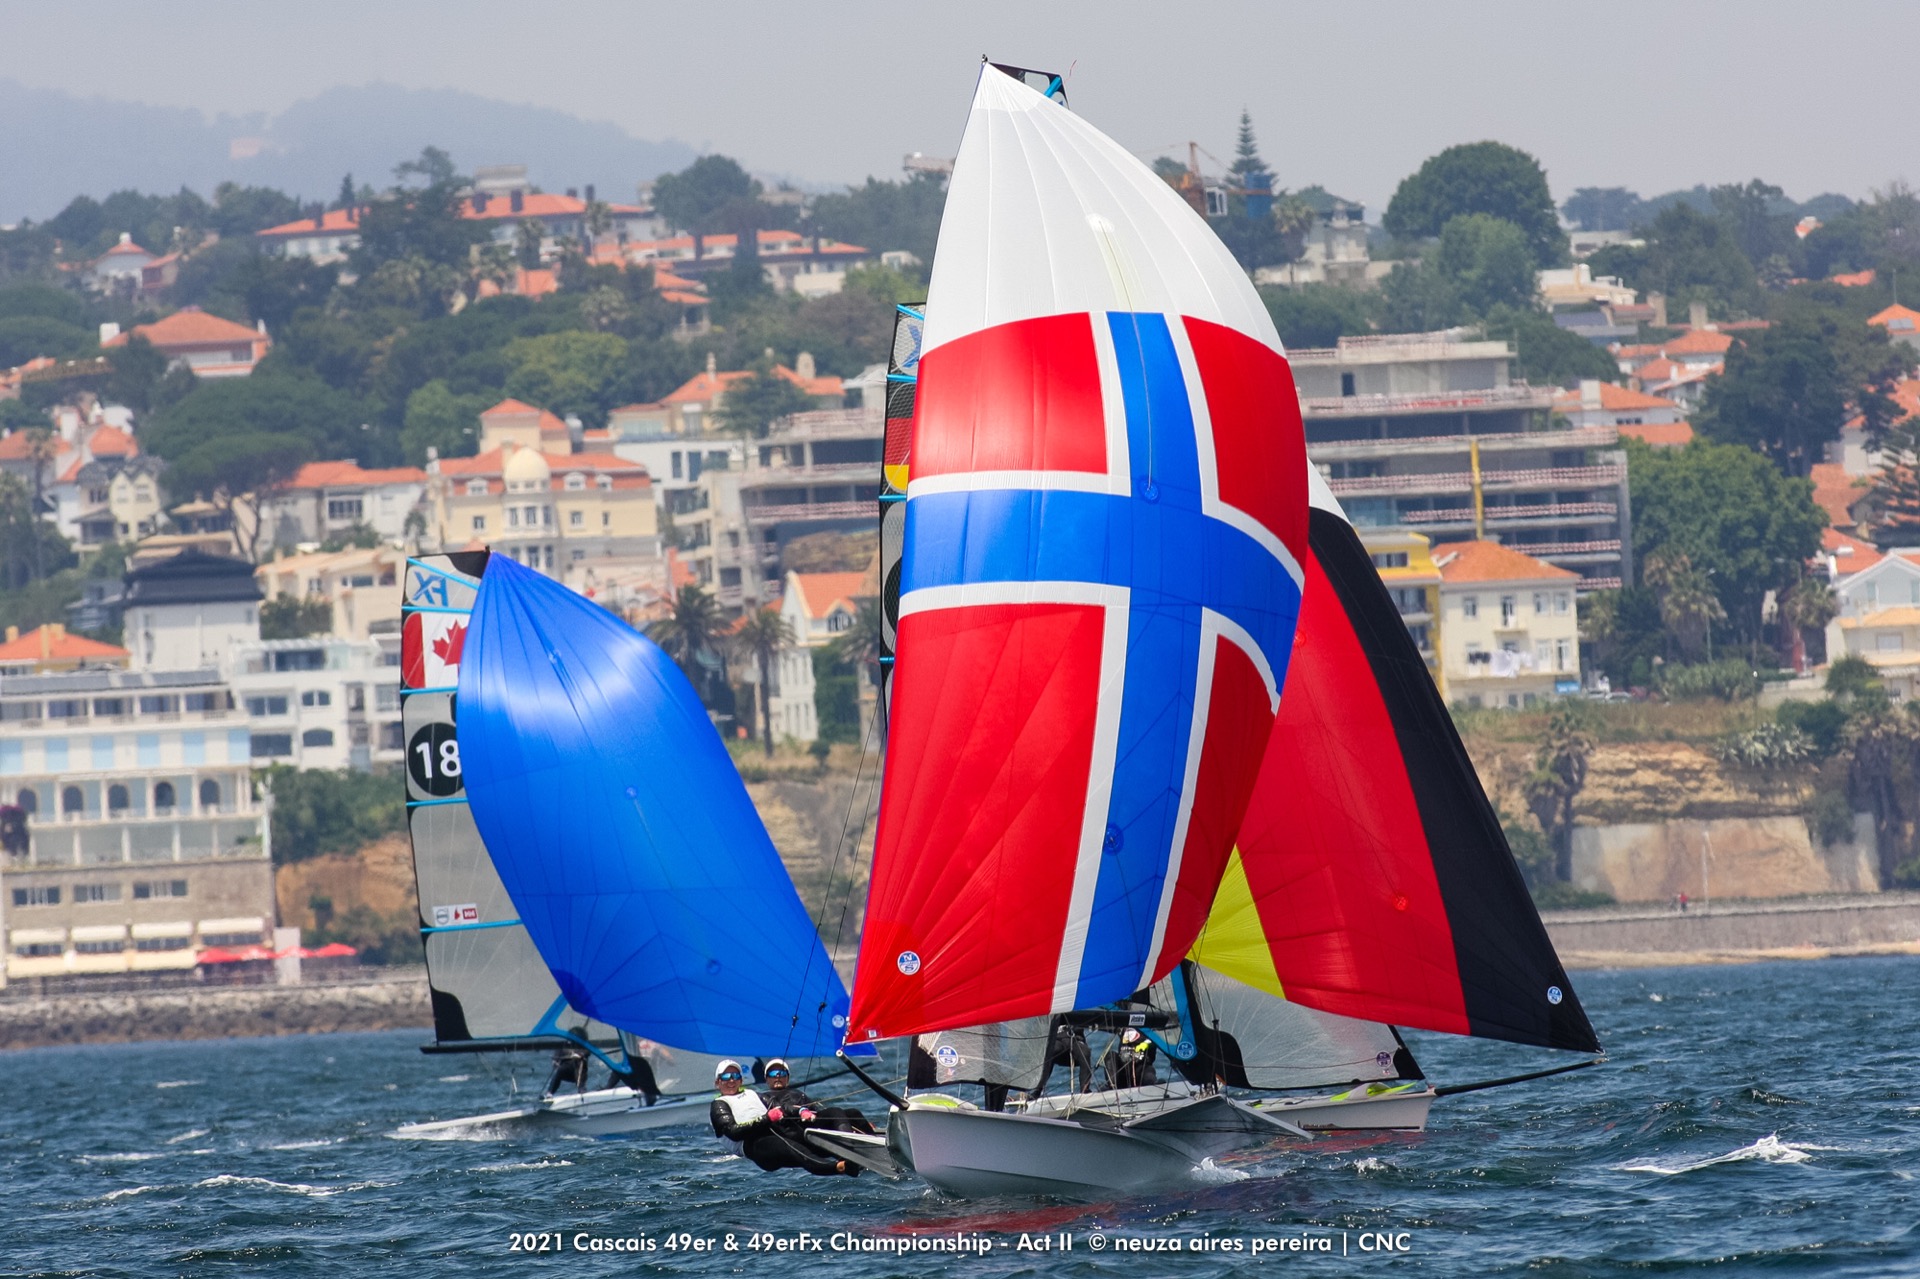 Dobson and Tidey (GBR) win in Cascais